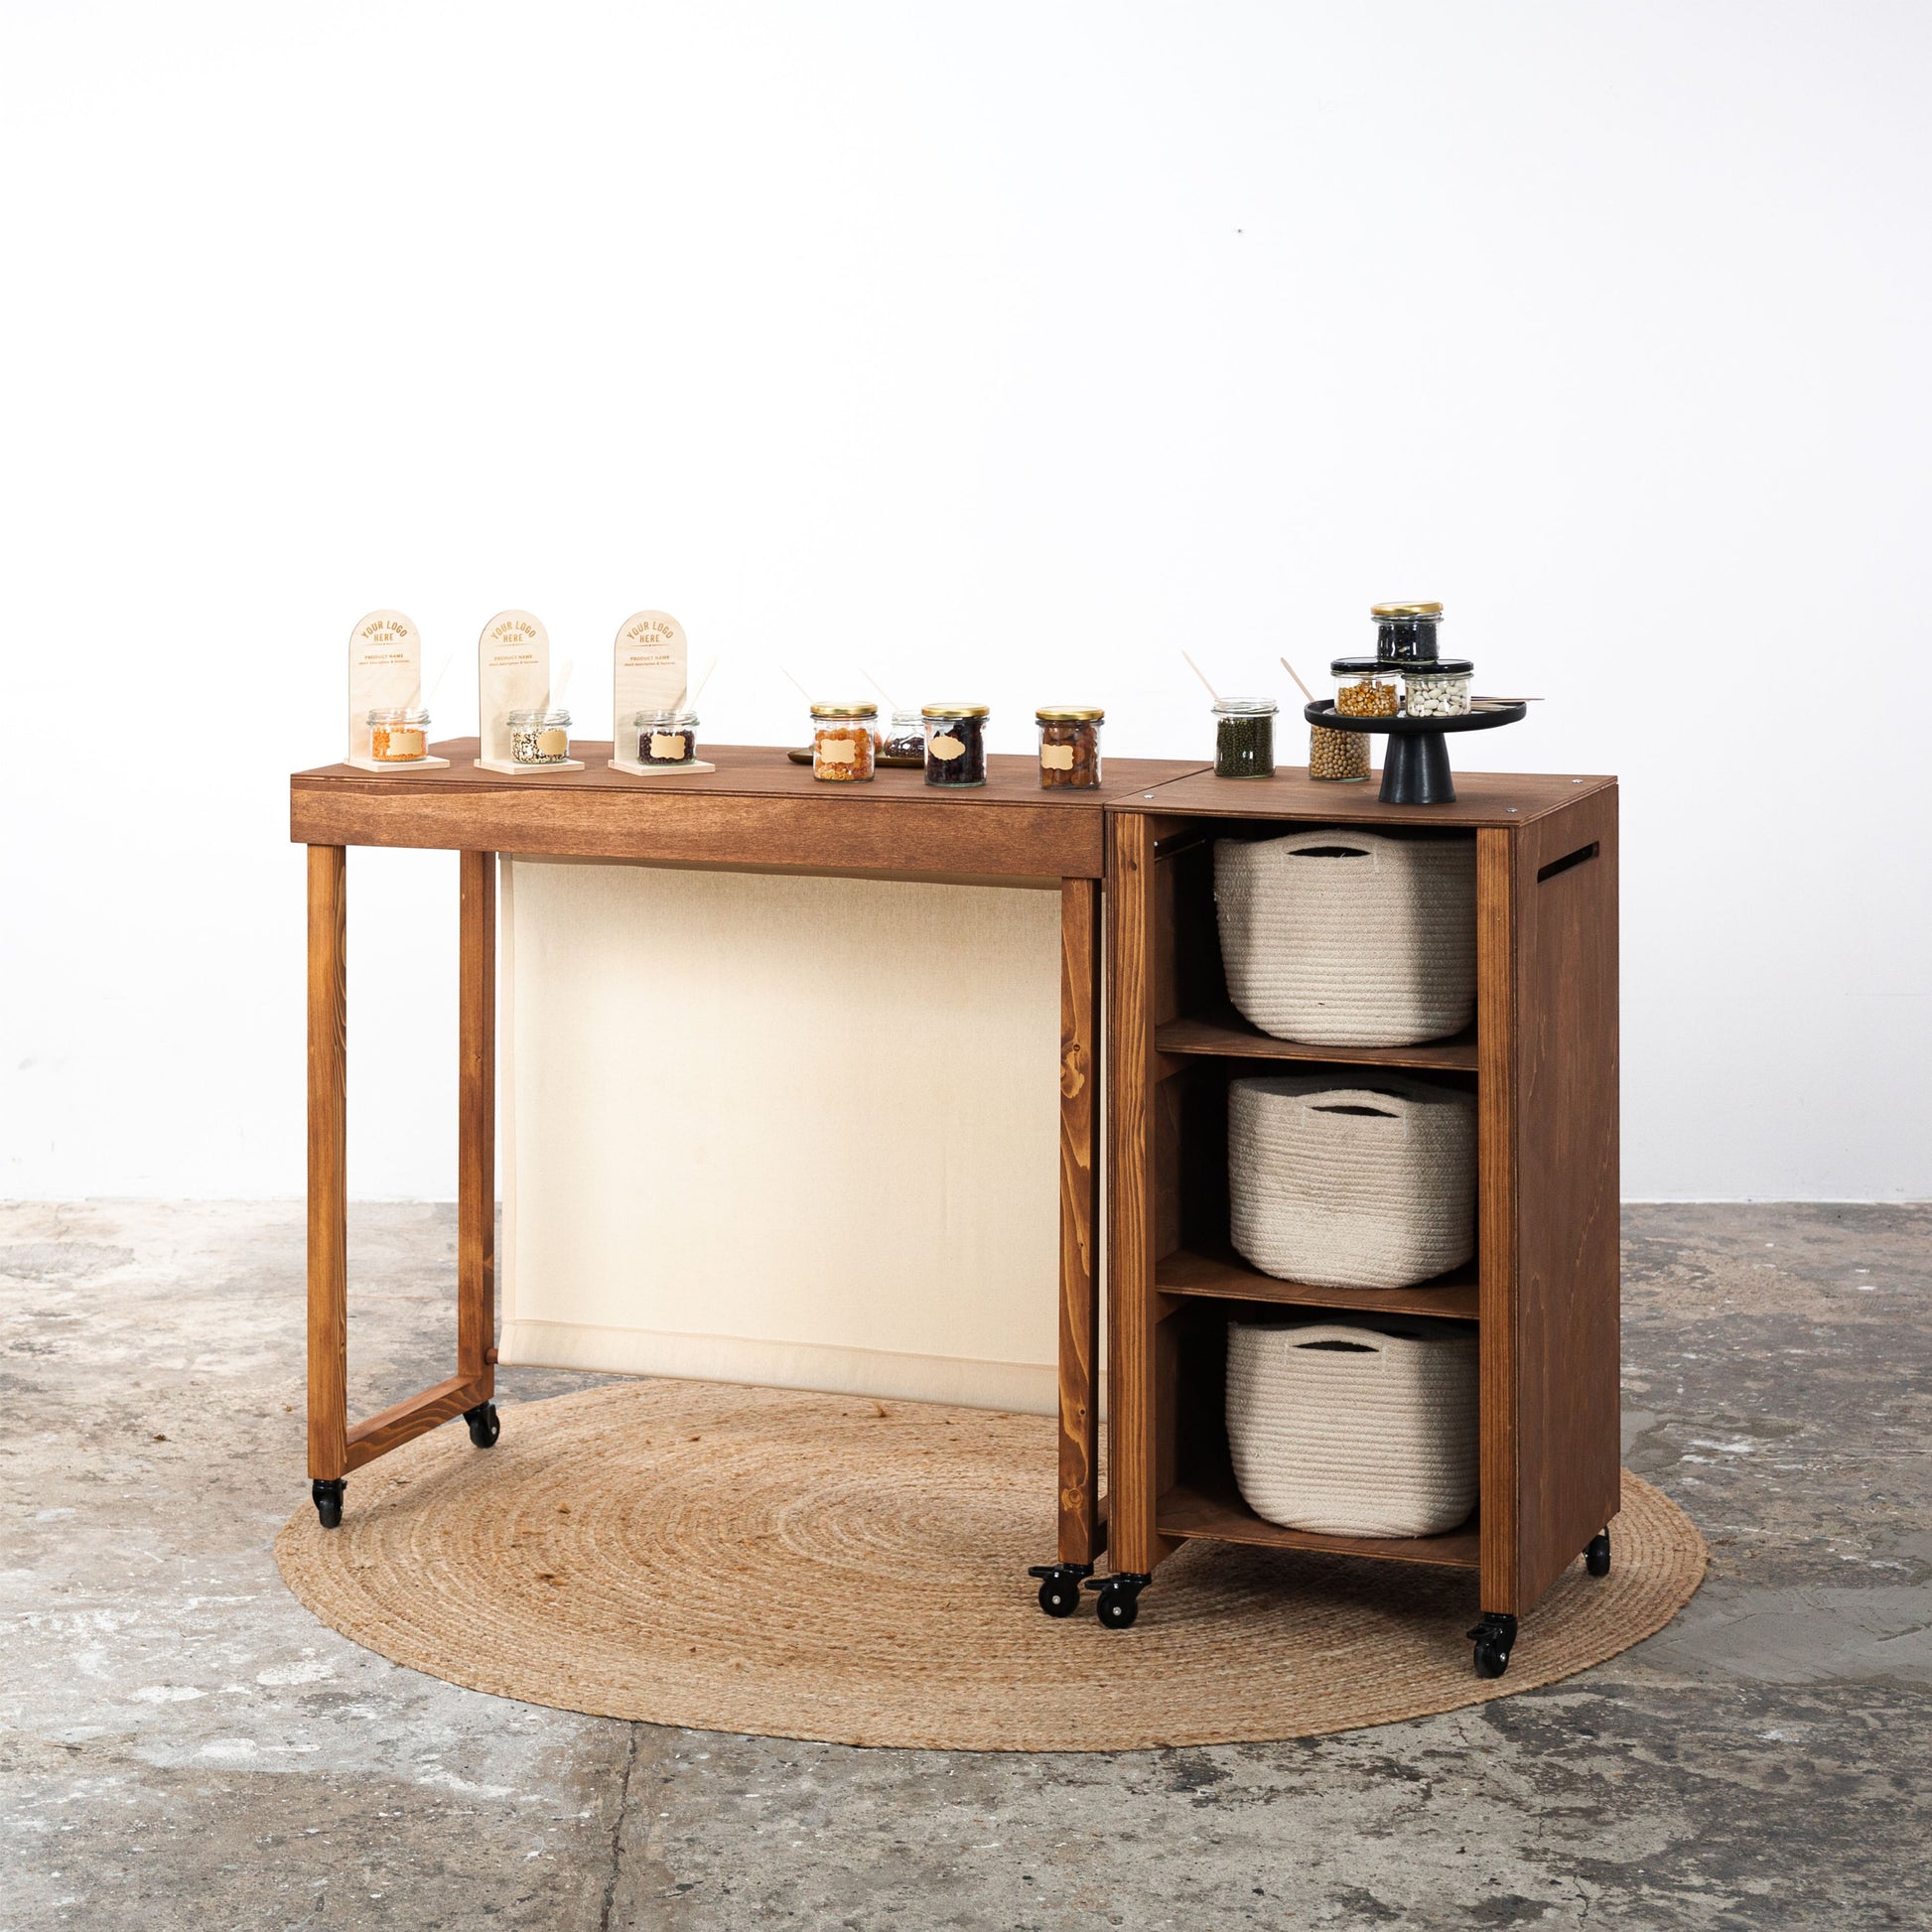 SET Vienna: Portable counter VC-06-W and table VC-04-C-W table in coffee color check out station, tasting station | Milimetry